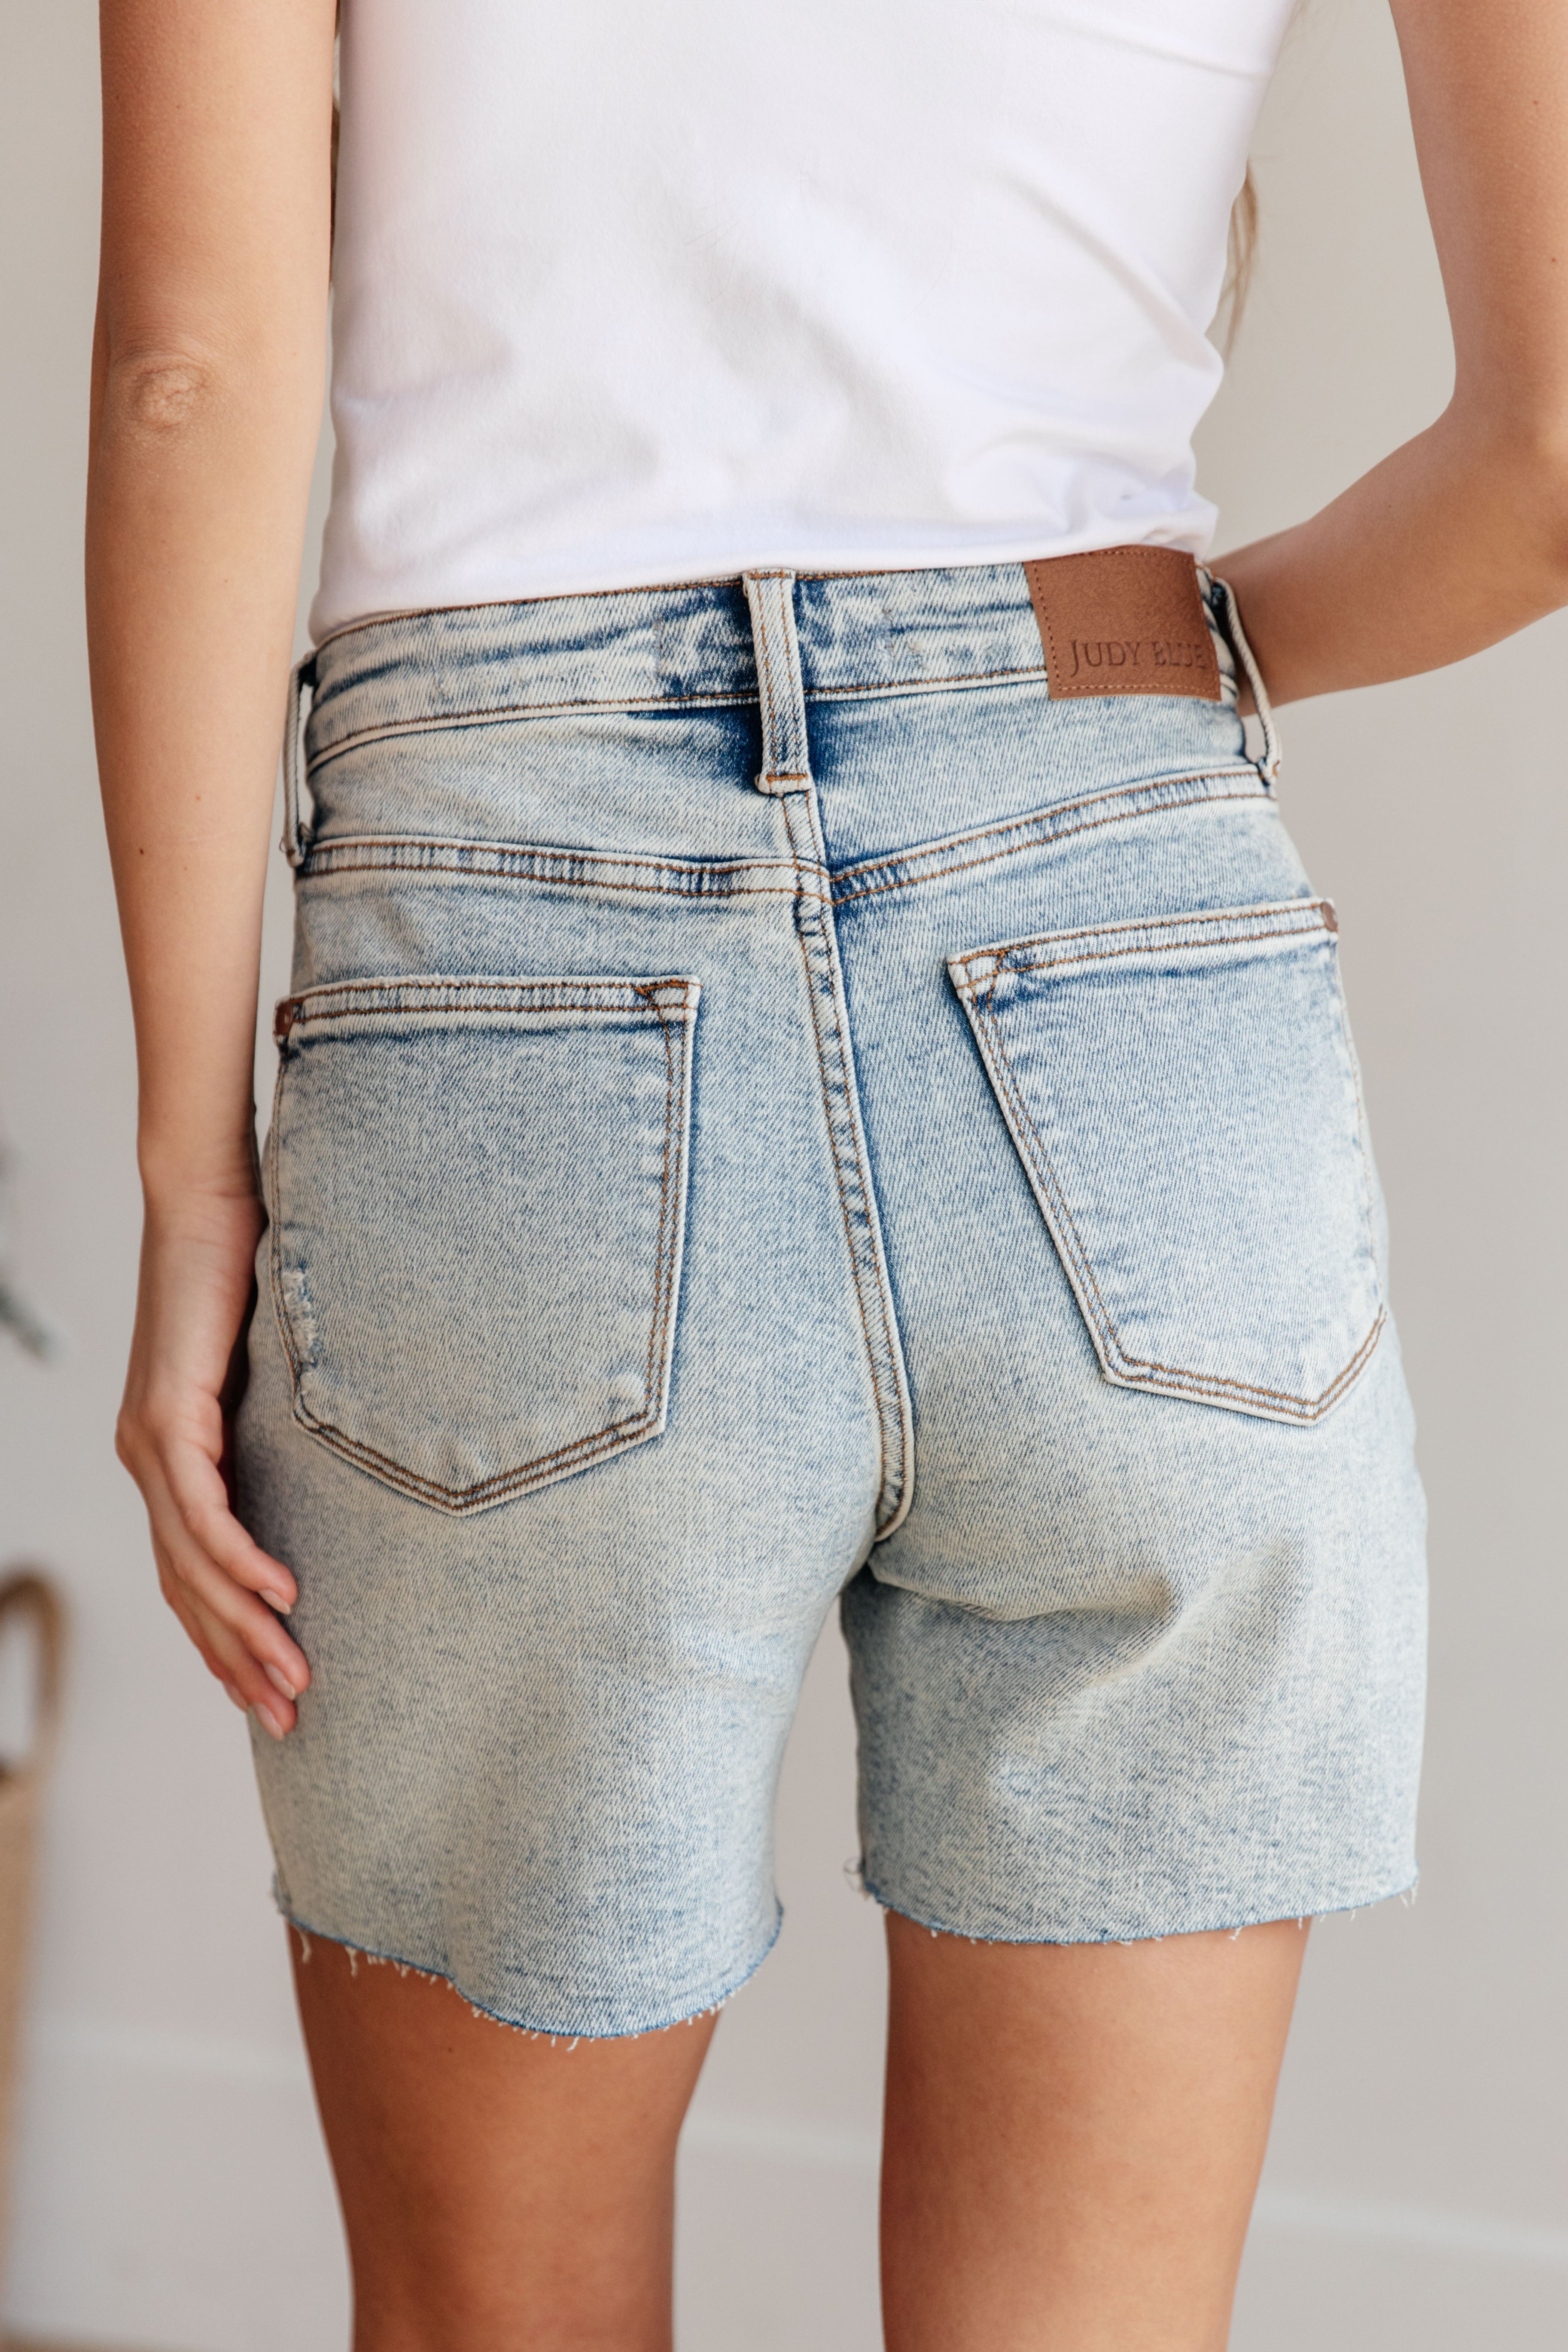 DOORBUSTER: Cindy High Rise Mineral Wash Distressed Boyfriend Shorts by Judy Blue - 6/10